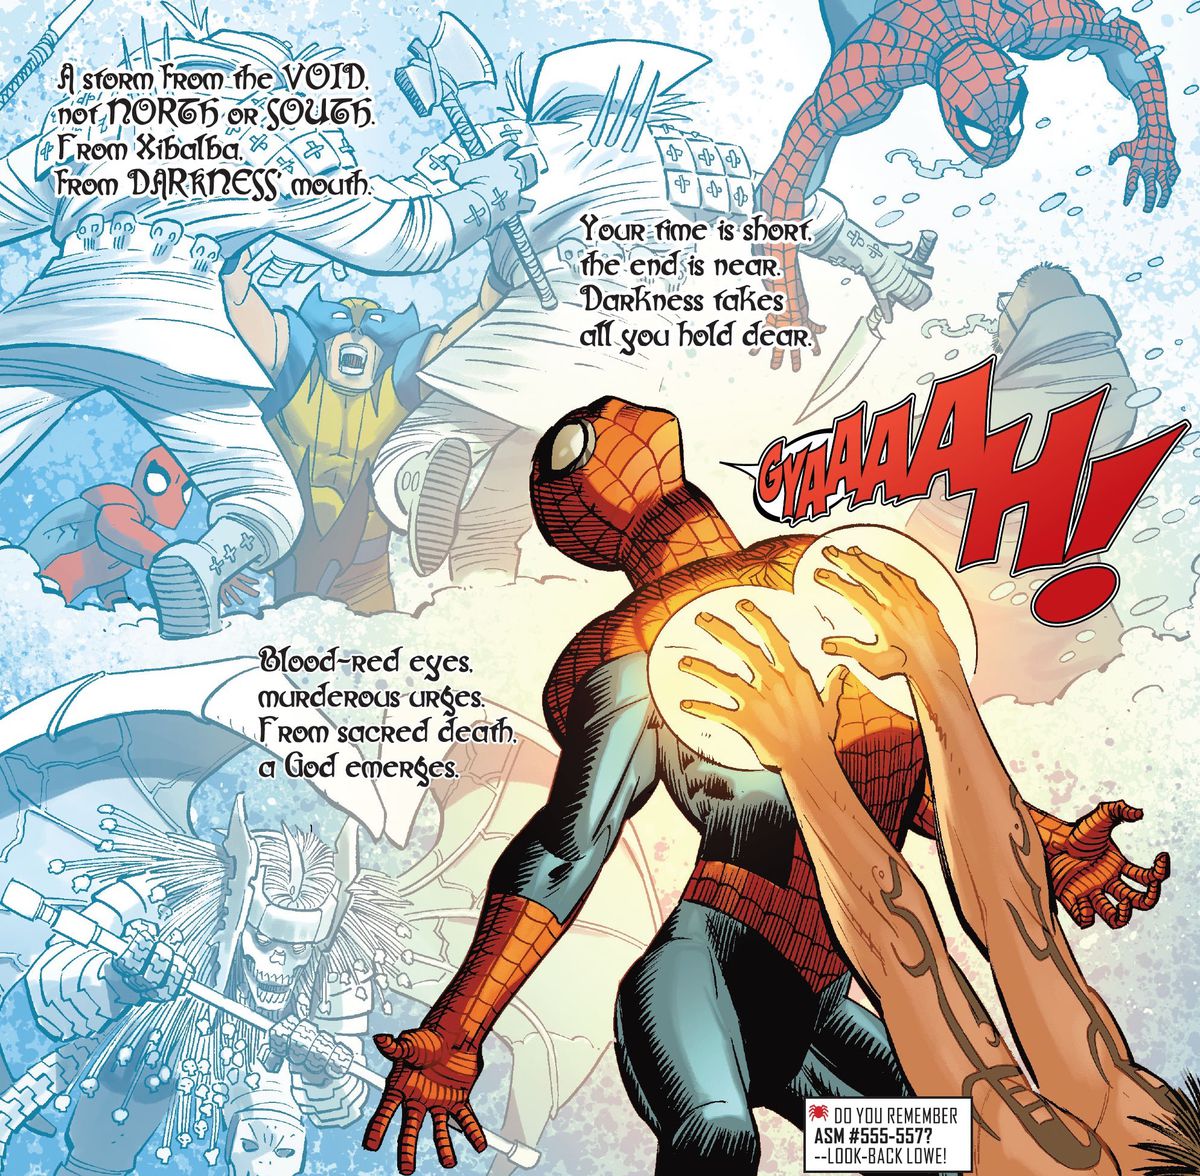 Rhyming verses abound in footage from previous Spider-man adventures as a guy with weird tattoos touches his chest with blazing hands in Amazing Spider-Man #21 (2023).